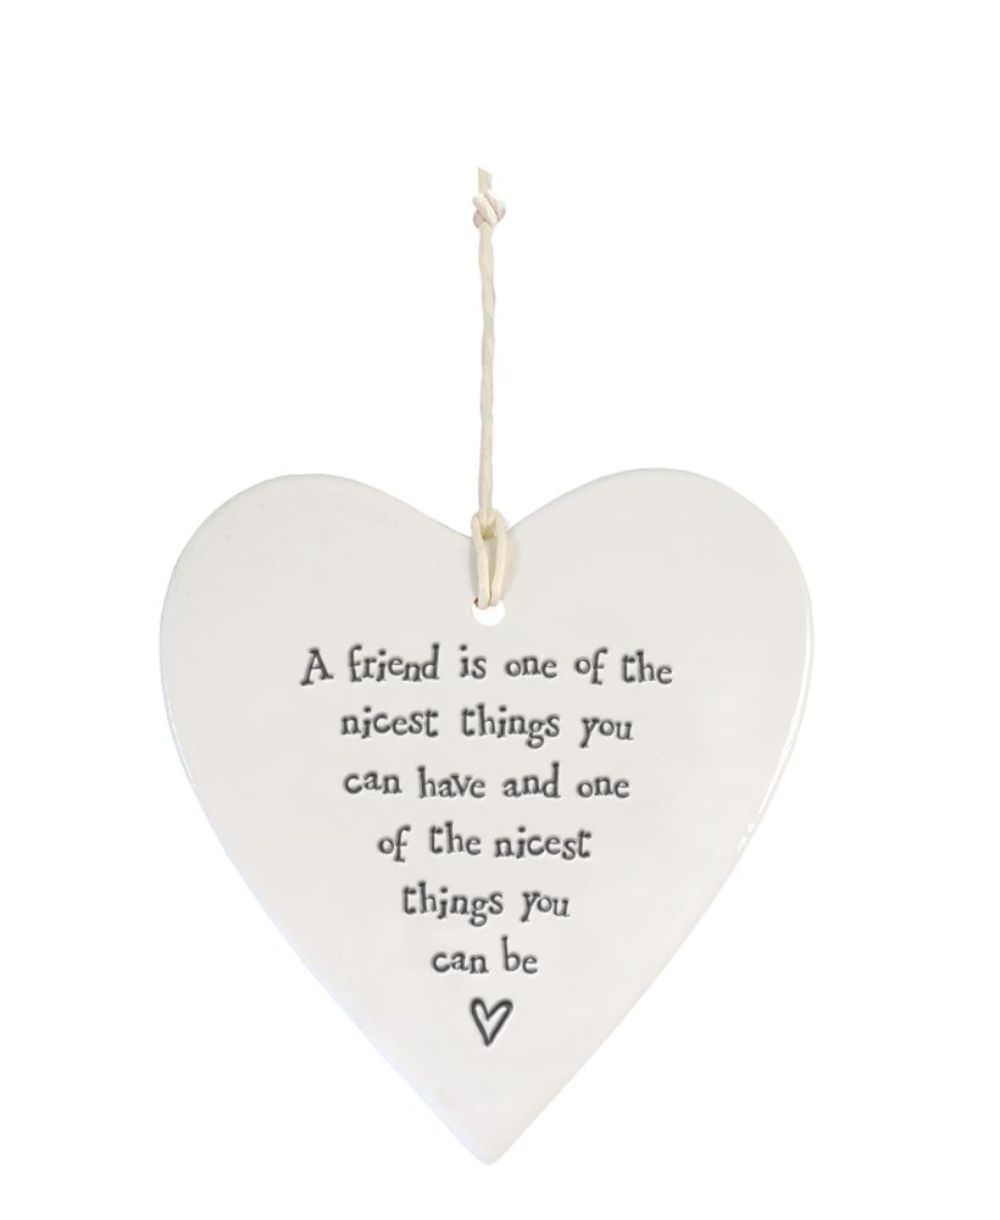 East Of India Friend Nicest Thing You Can Be Heart Shaped Ceramic Hanging Plaque